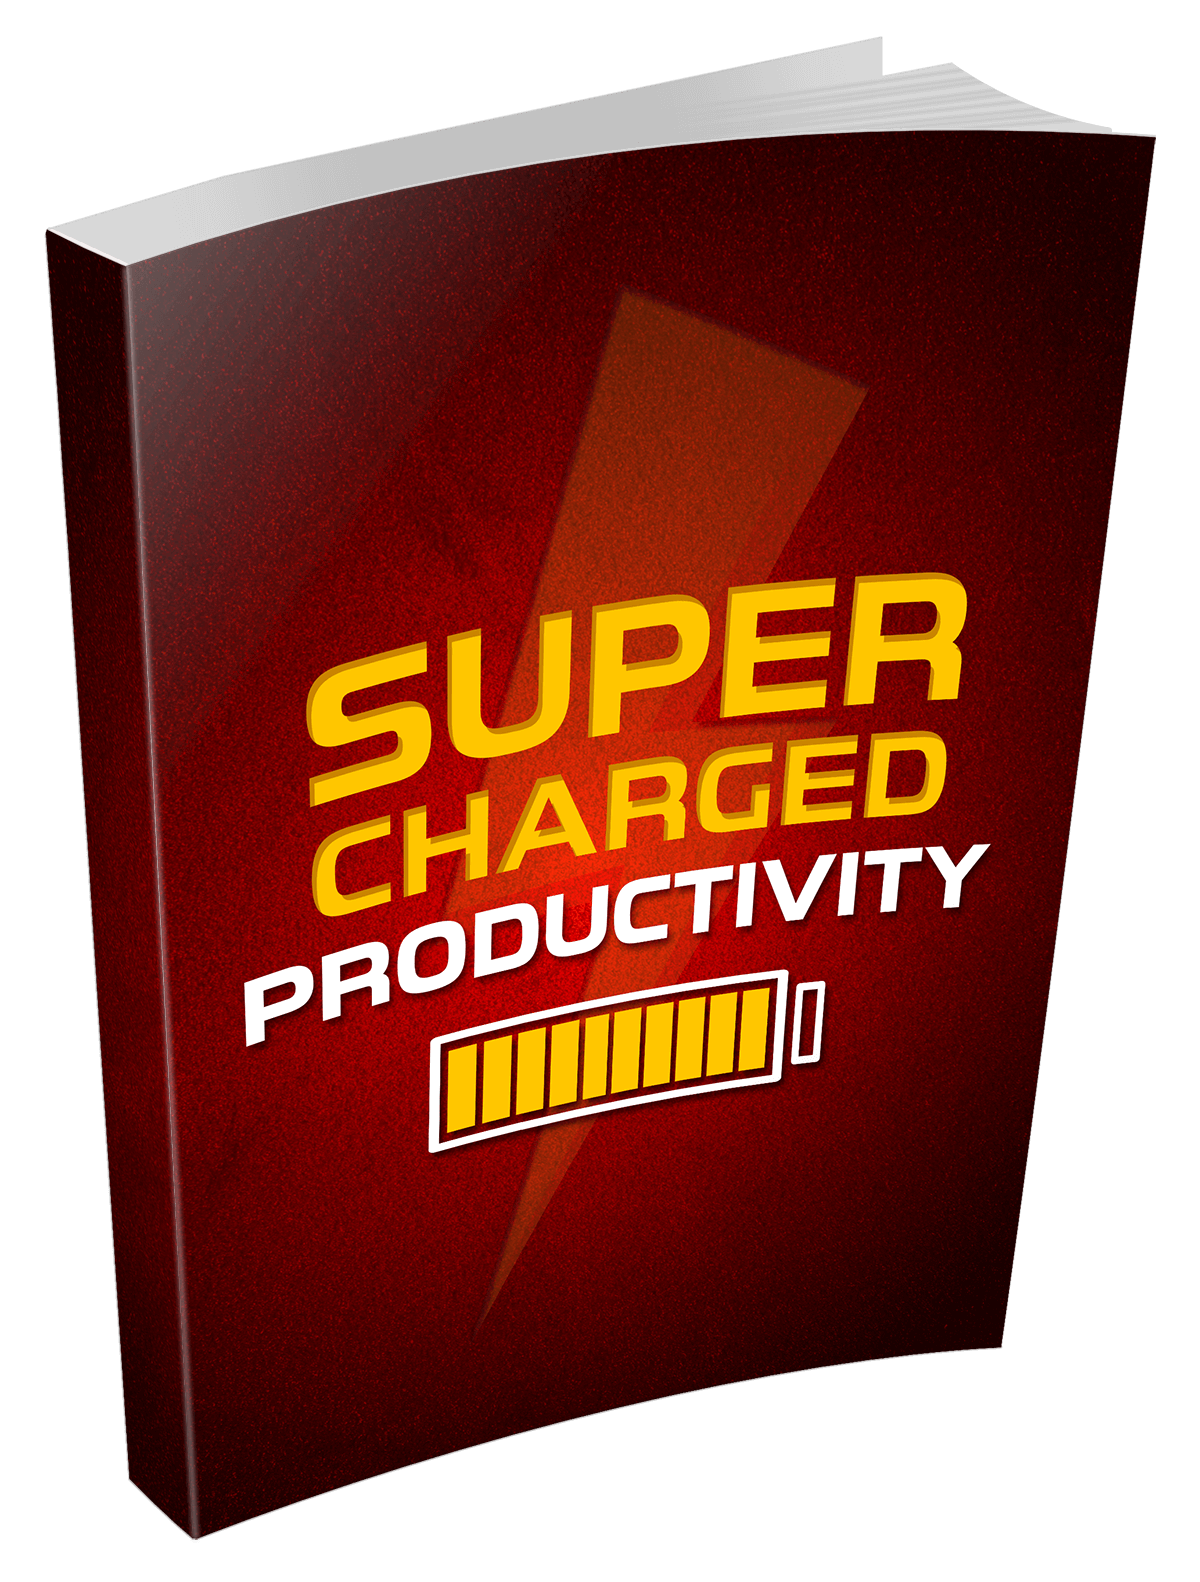 Supercharged Productivity